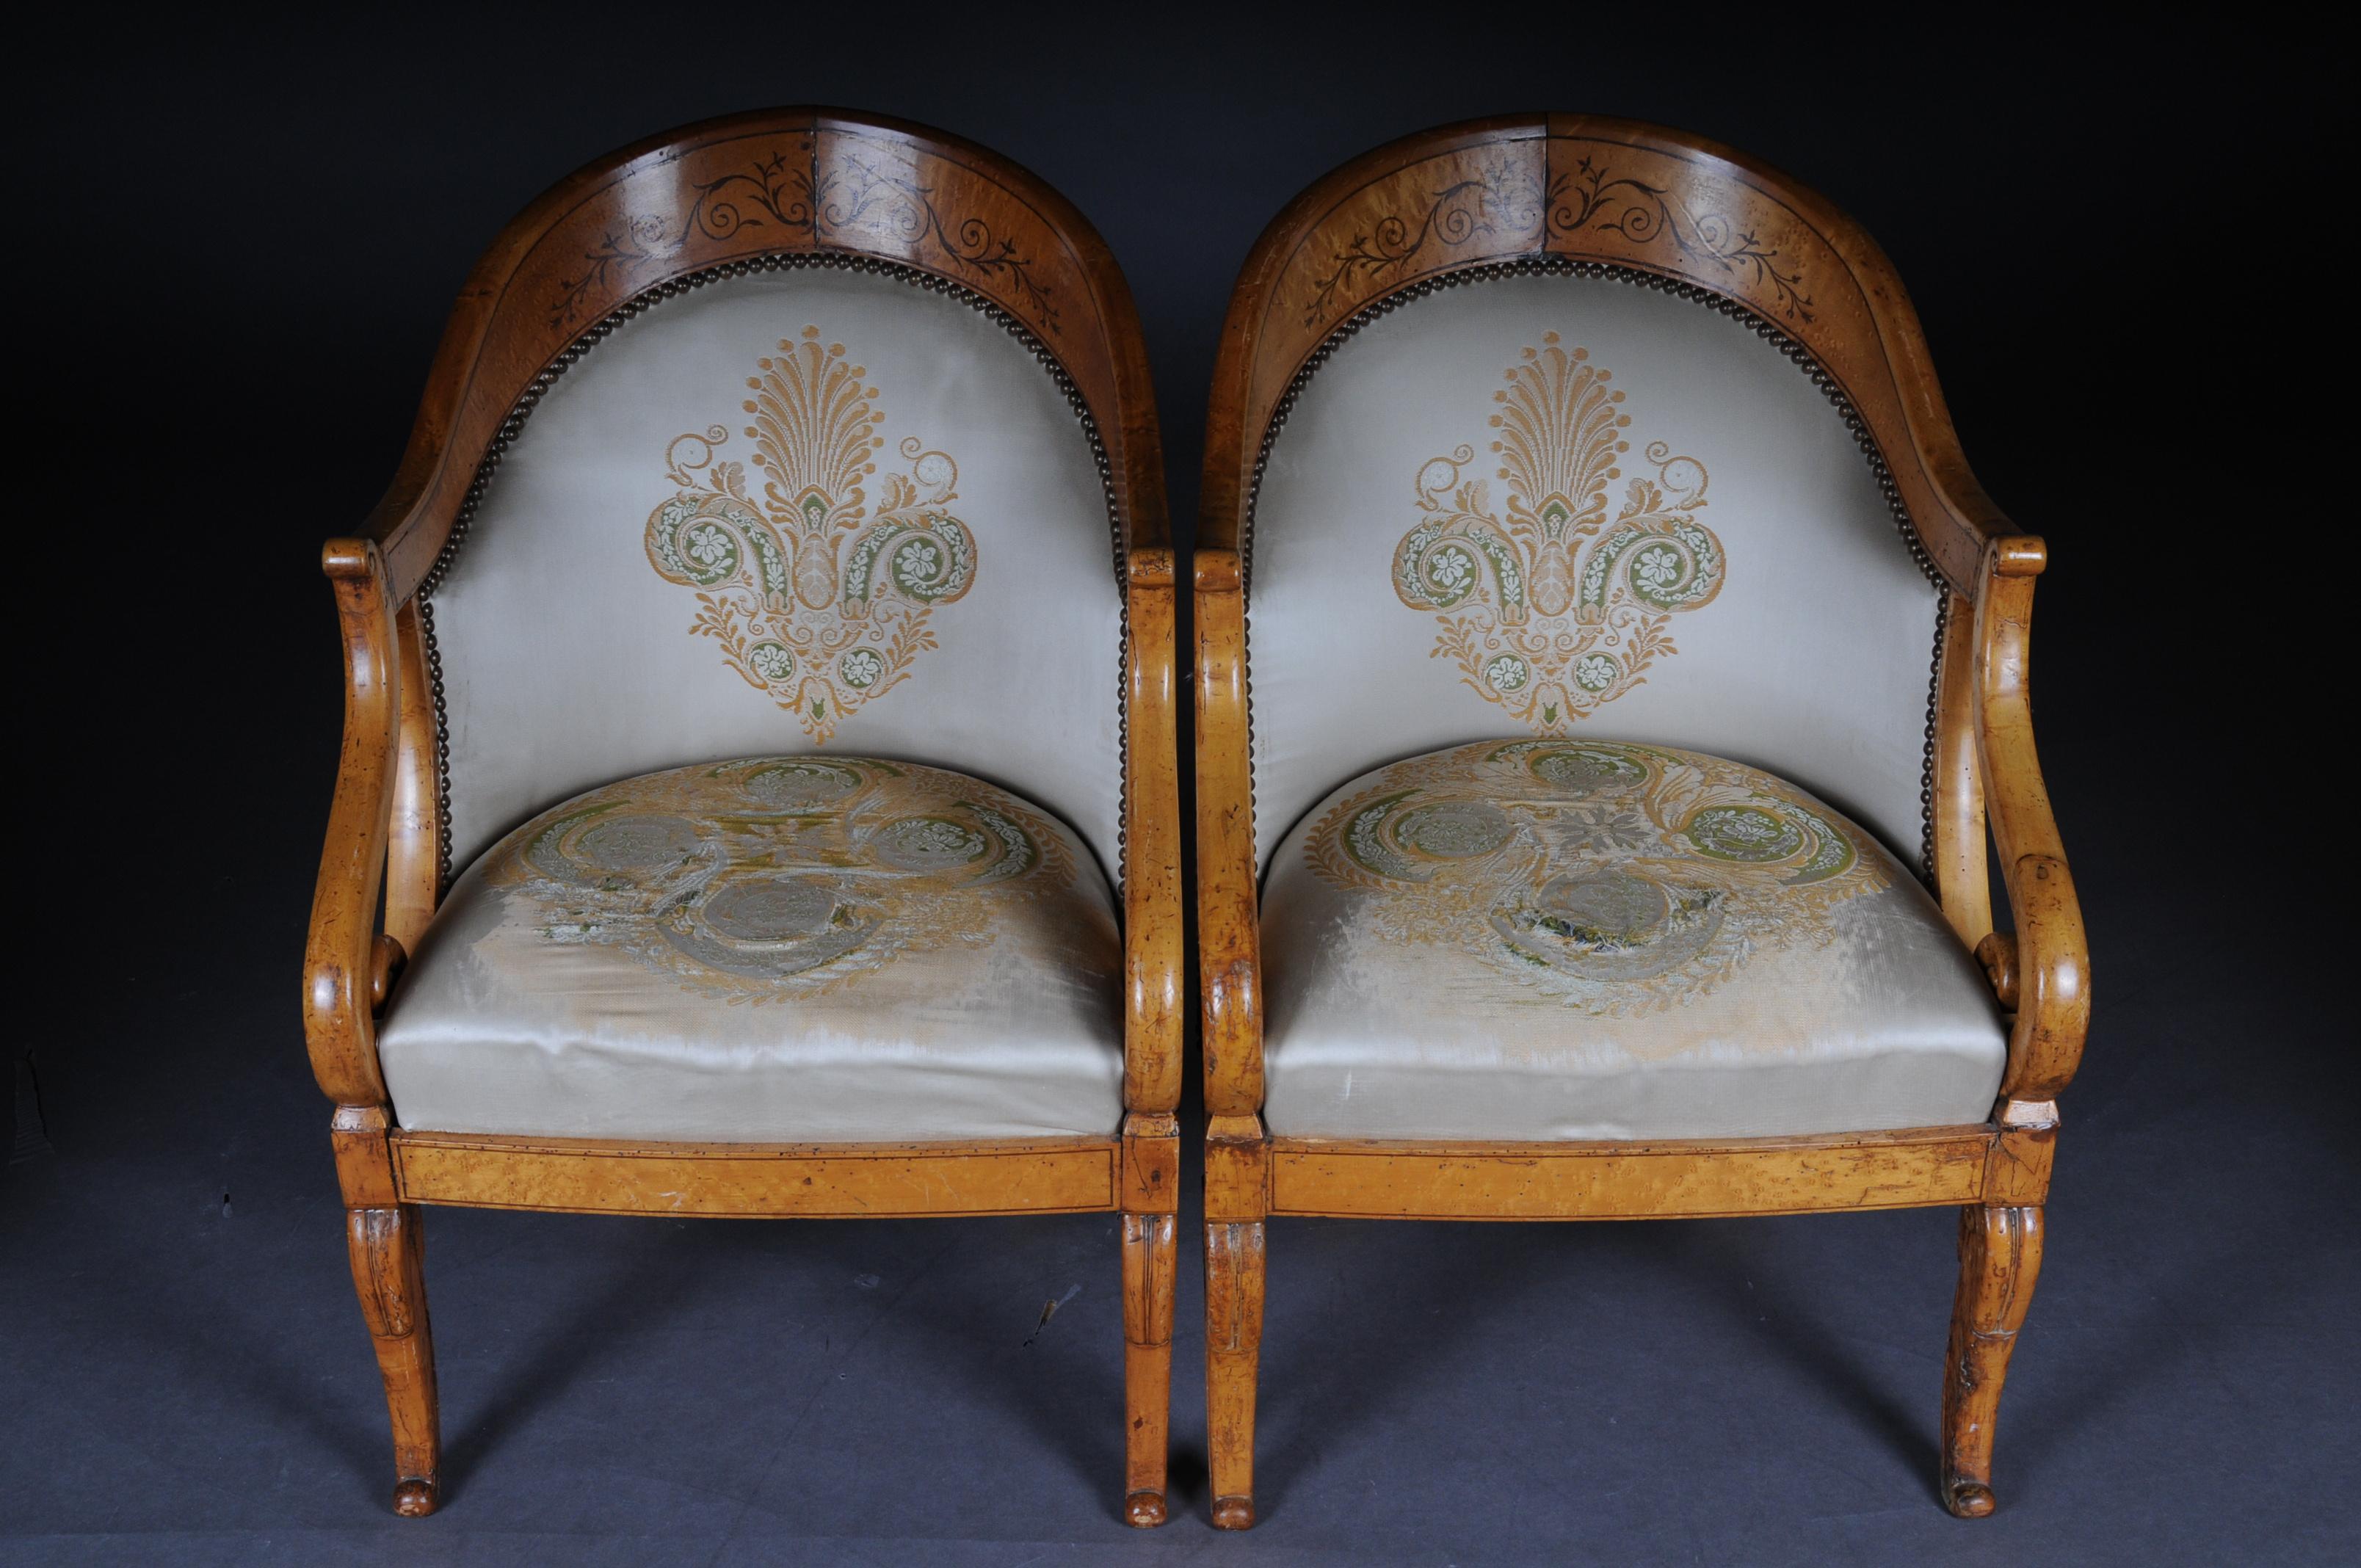 Set of Empire Armchairs / Chairs, Maple Wood, Paris, 1825 In Fair Condition For Sale In Berlin, DE